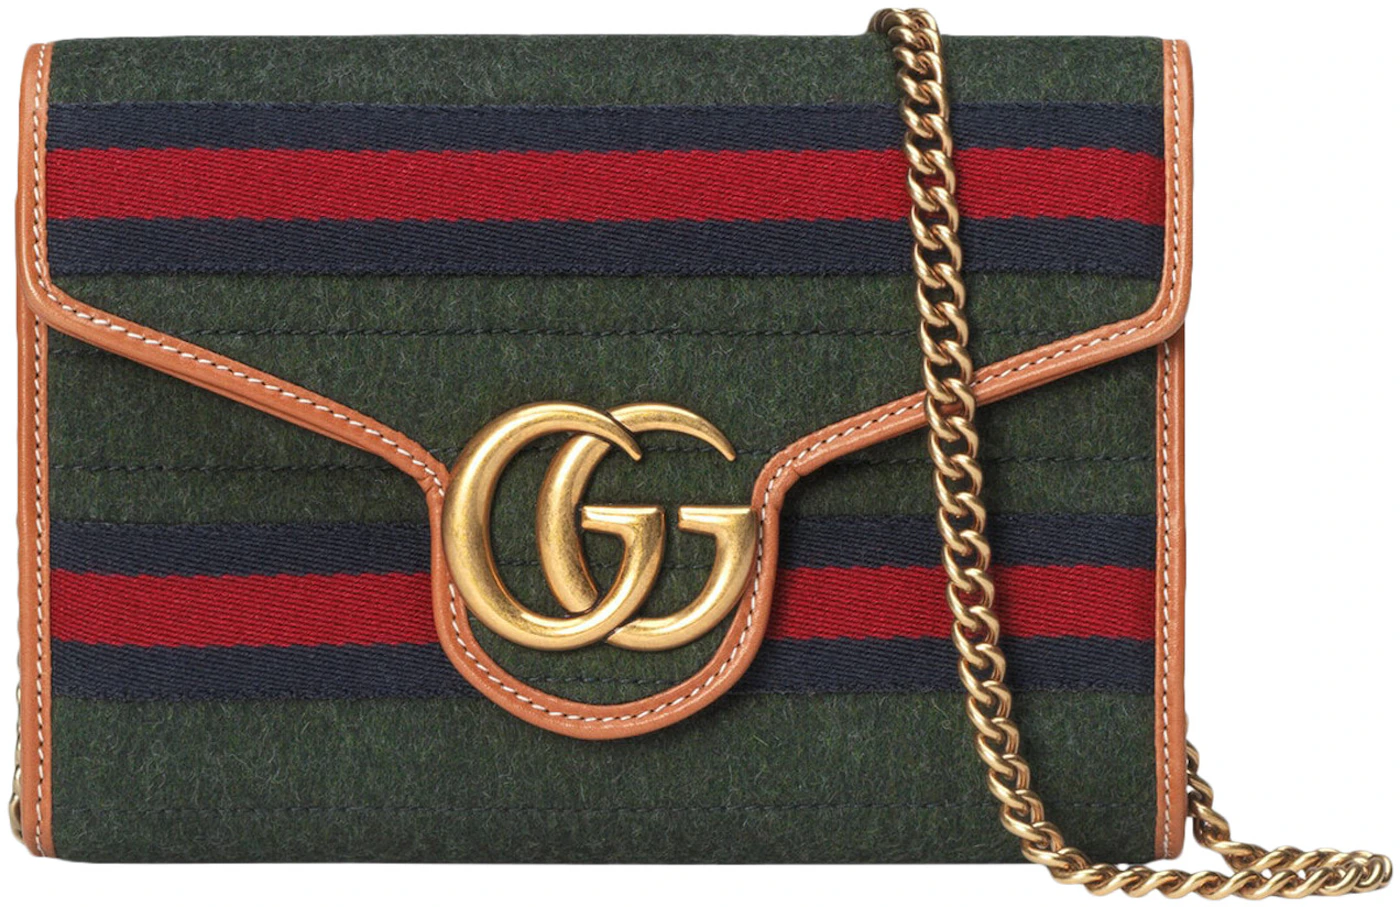 GG Marmont matelassé card case in red